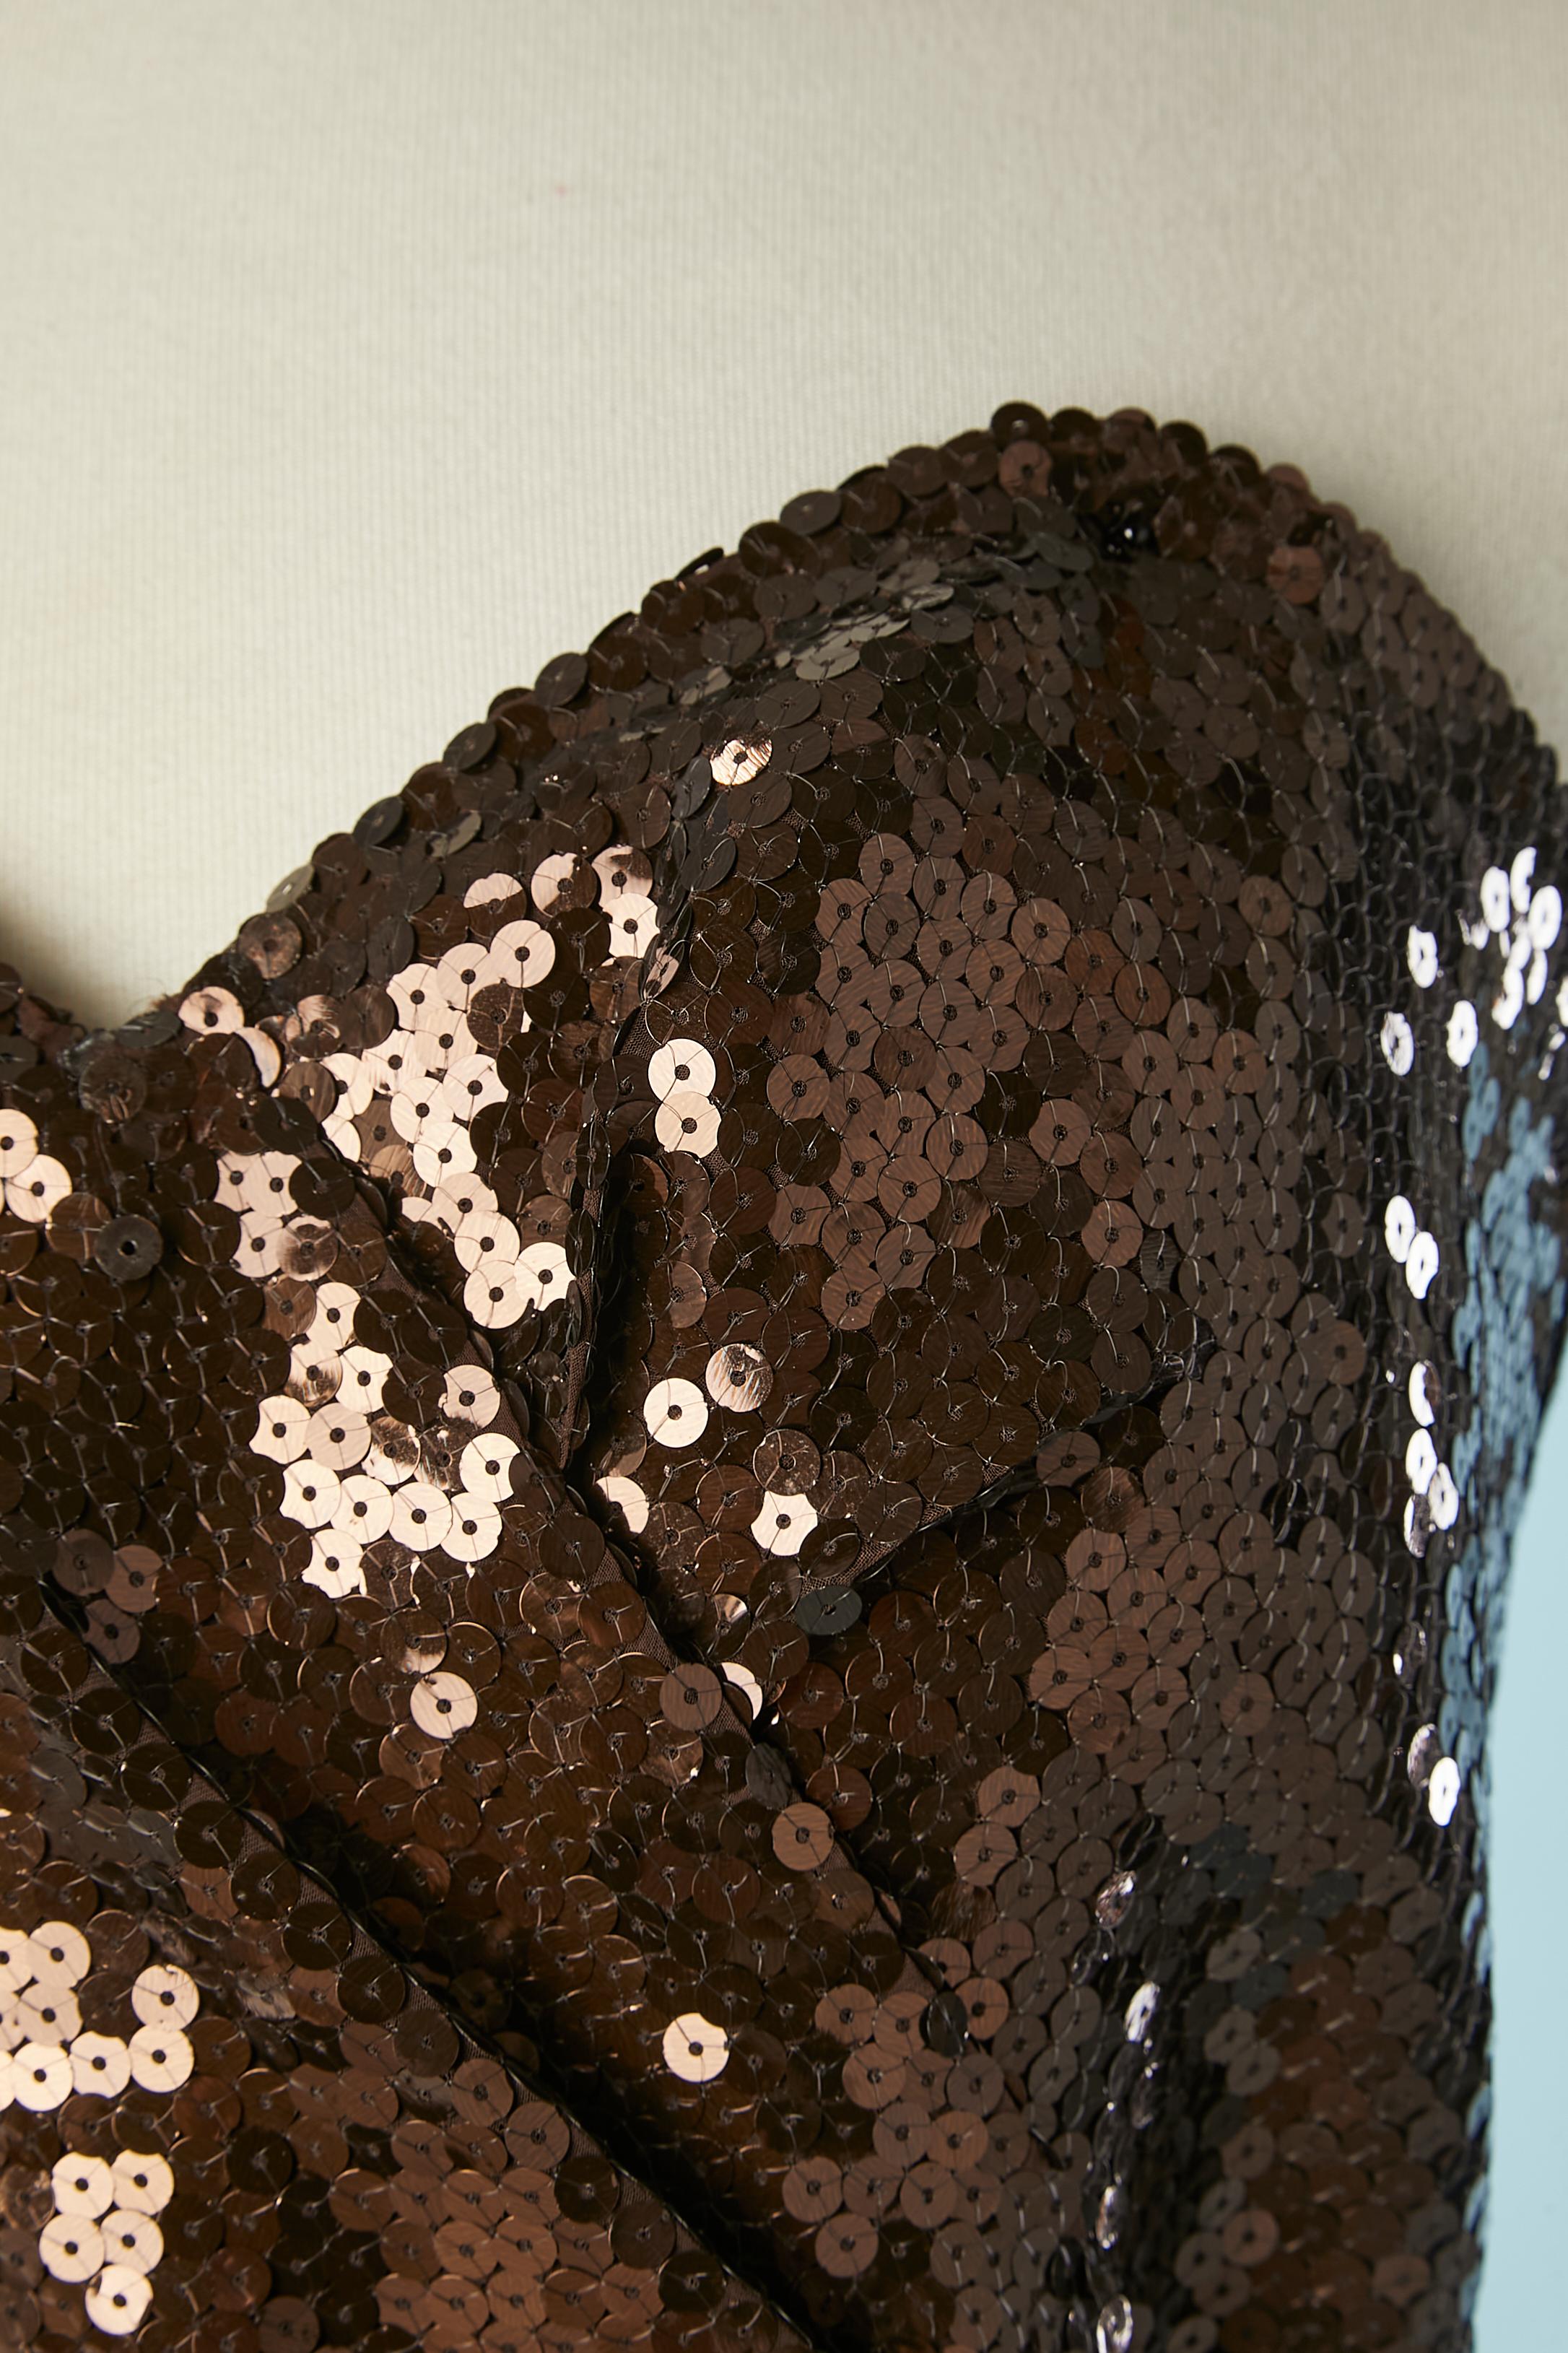  Wrap bustier cocktail dress in brown sequin. Boned bustier inside the top part of the dress. Zip and hook&eye on the top middle back. The wrap part is attach in the middle back with hook&eye. Brown rayon lining.
SIZE 40 (Fr) M